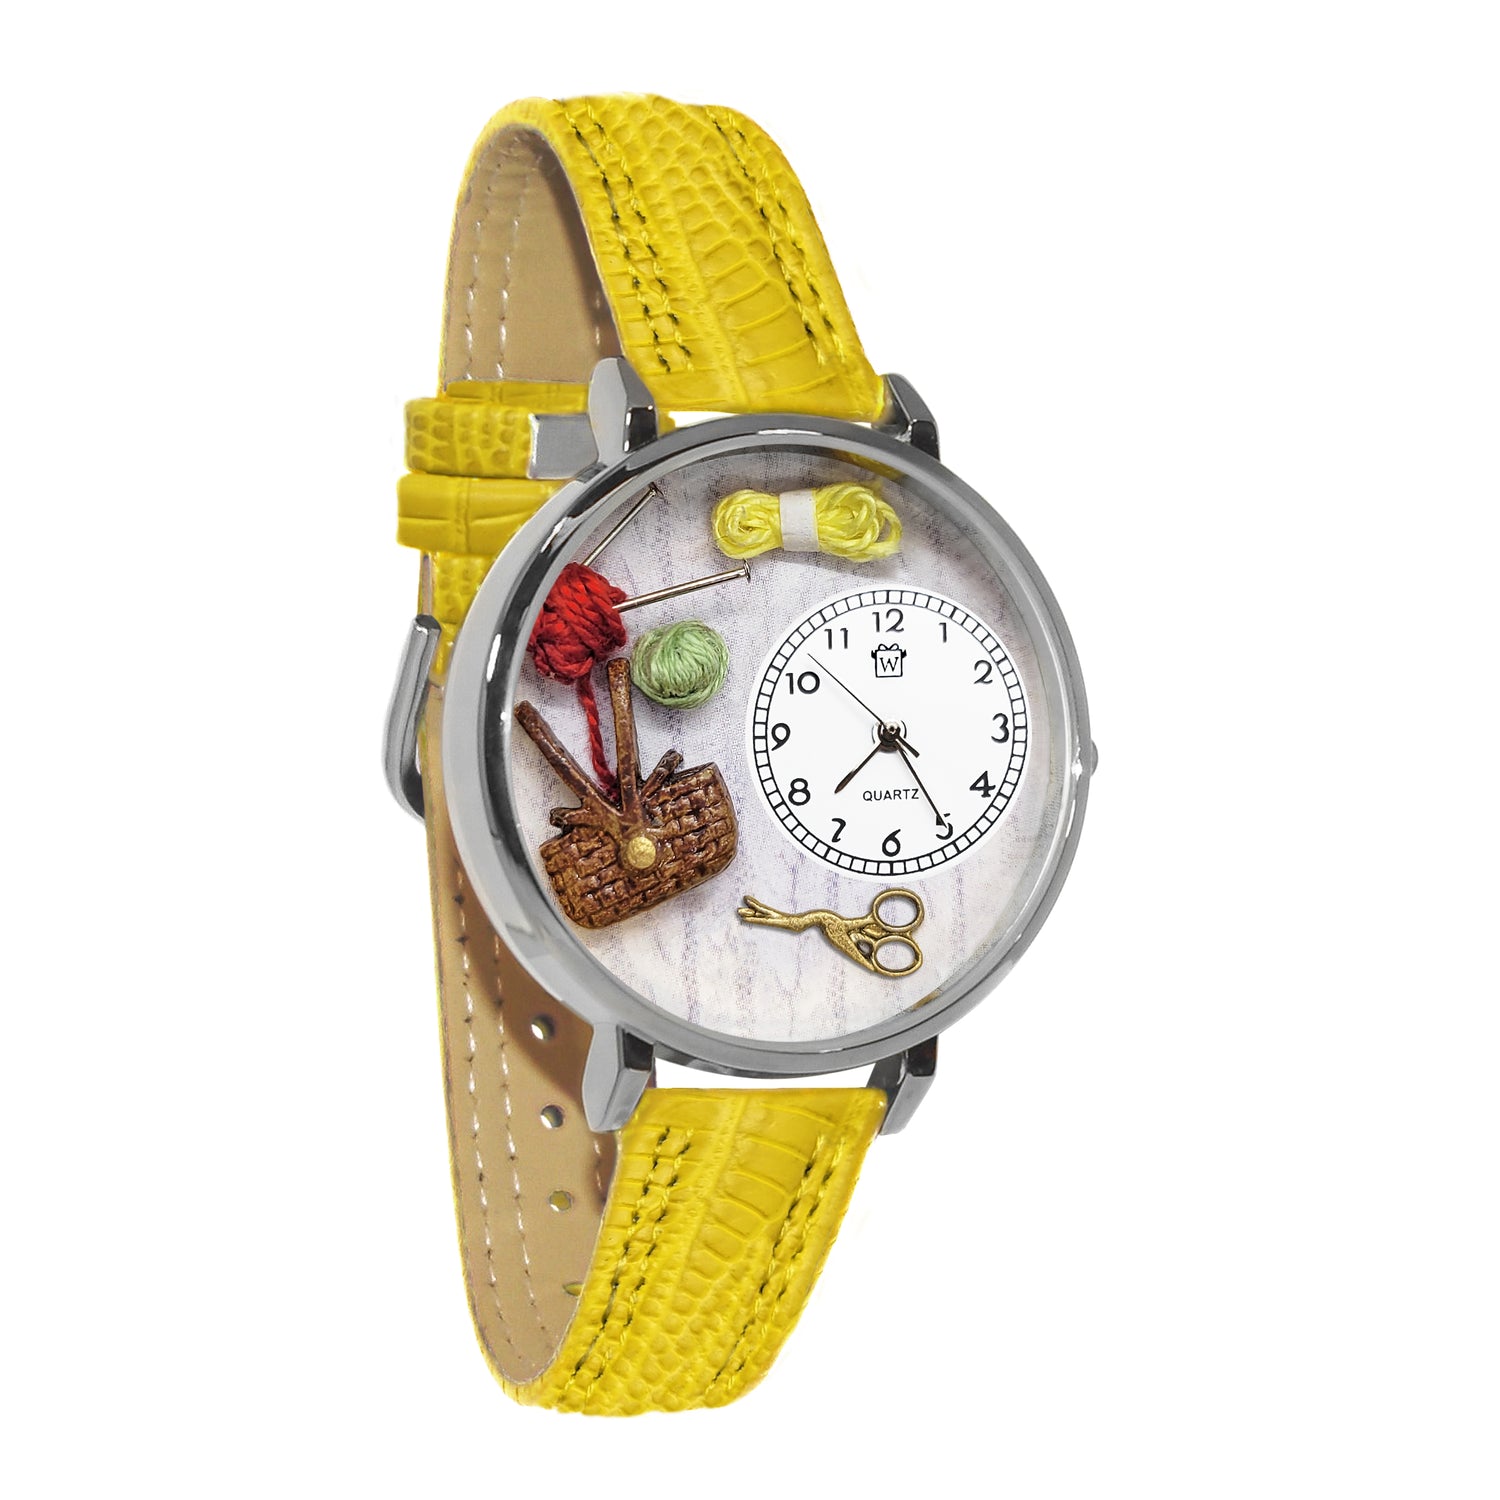 Whimsical Gifts | Knitting Basket 3D Watch Large Style | Handmade in USA | Hobbies & Special Interests | Sewing & Crafting | Novelty Unique Fun Miniatures Gift | Silver Finish Yellow Leather Watch Band